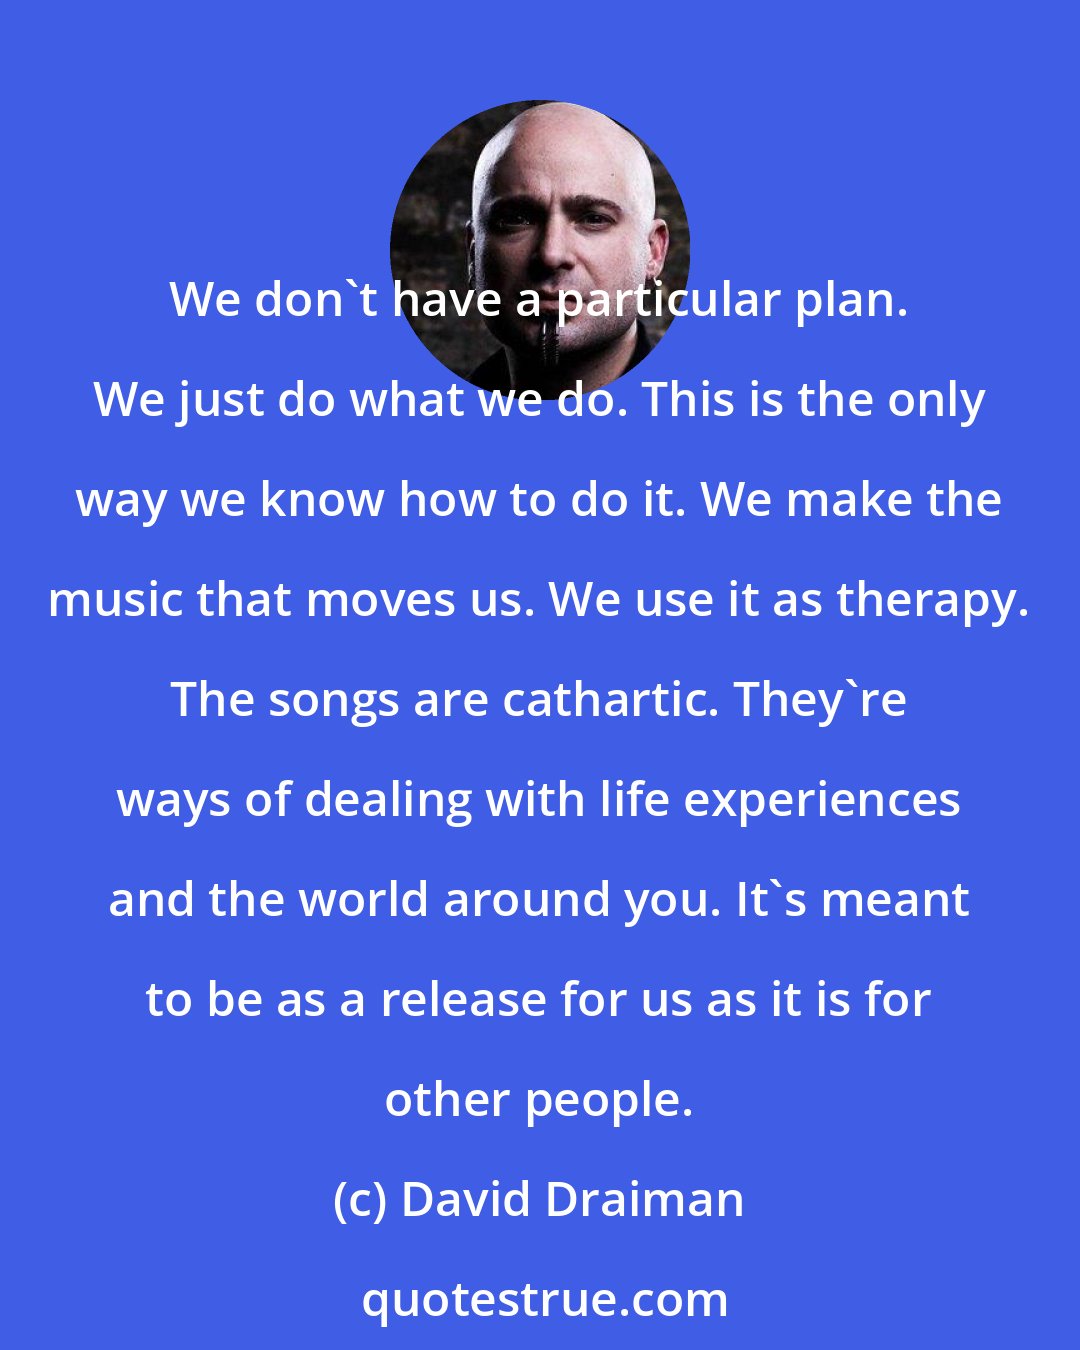 David Draiman: We don't have a particular plan. We just do what we do. This is the only way we know how to do it. We make the music that moves us. We use it as therapy. The songs are cathartic. They're ways of dealing with life experiences and the world around you. It's meant to be as a release for us as it is for other people.